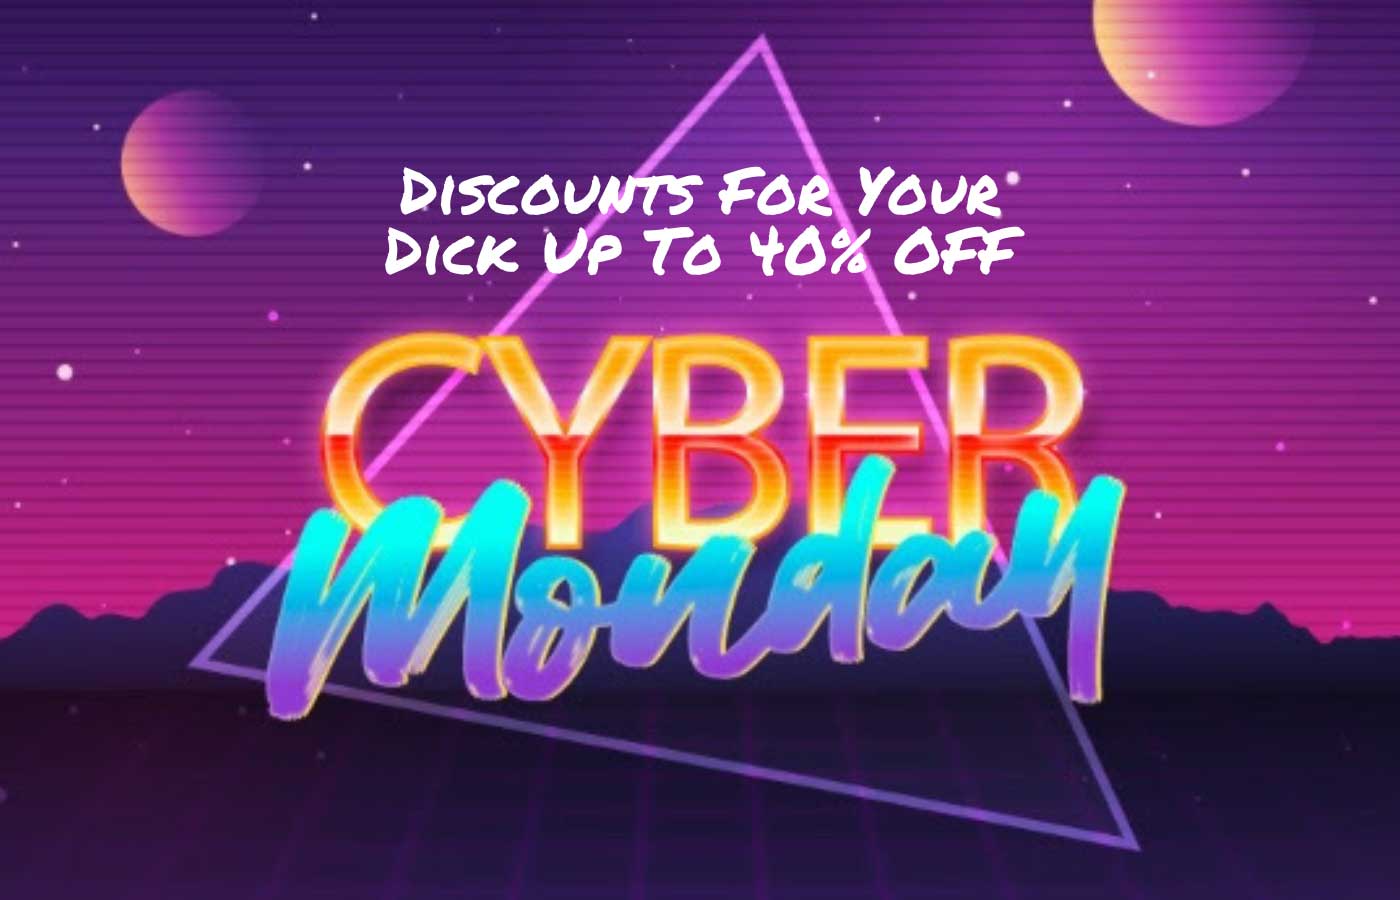 Treat Your Dong To These Nut Busting Cyber Bate Monday Deals!